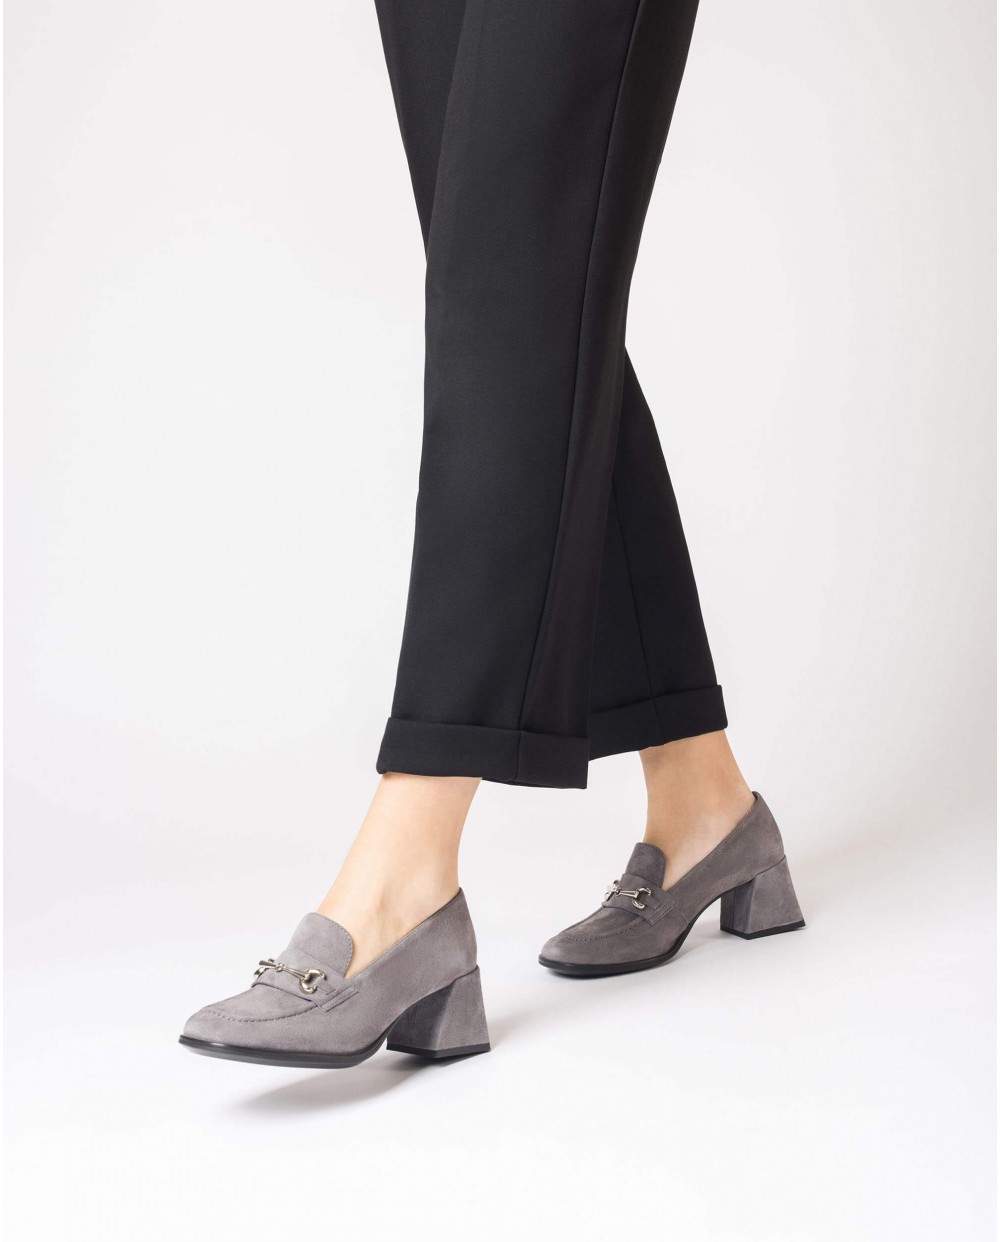 Wonders-Loafers and ballerines-Grey CELIA moccasin